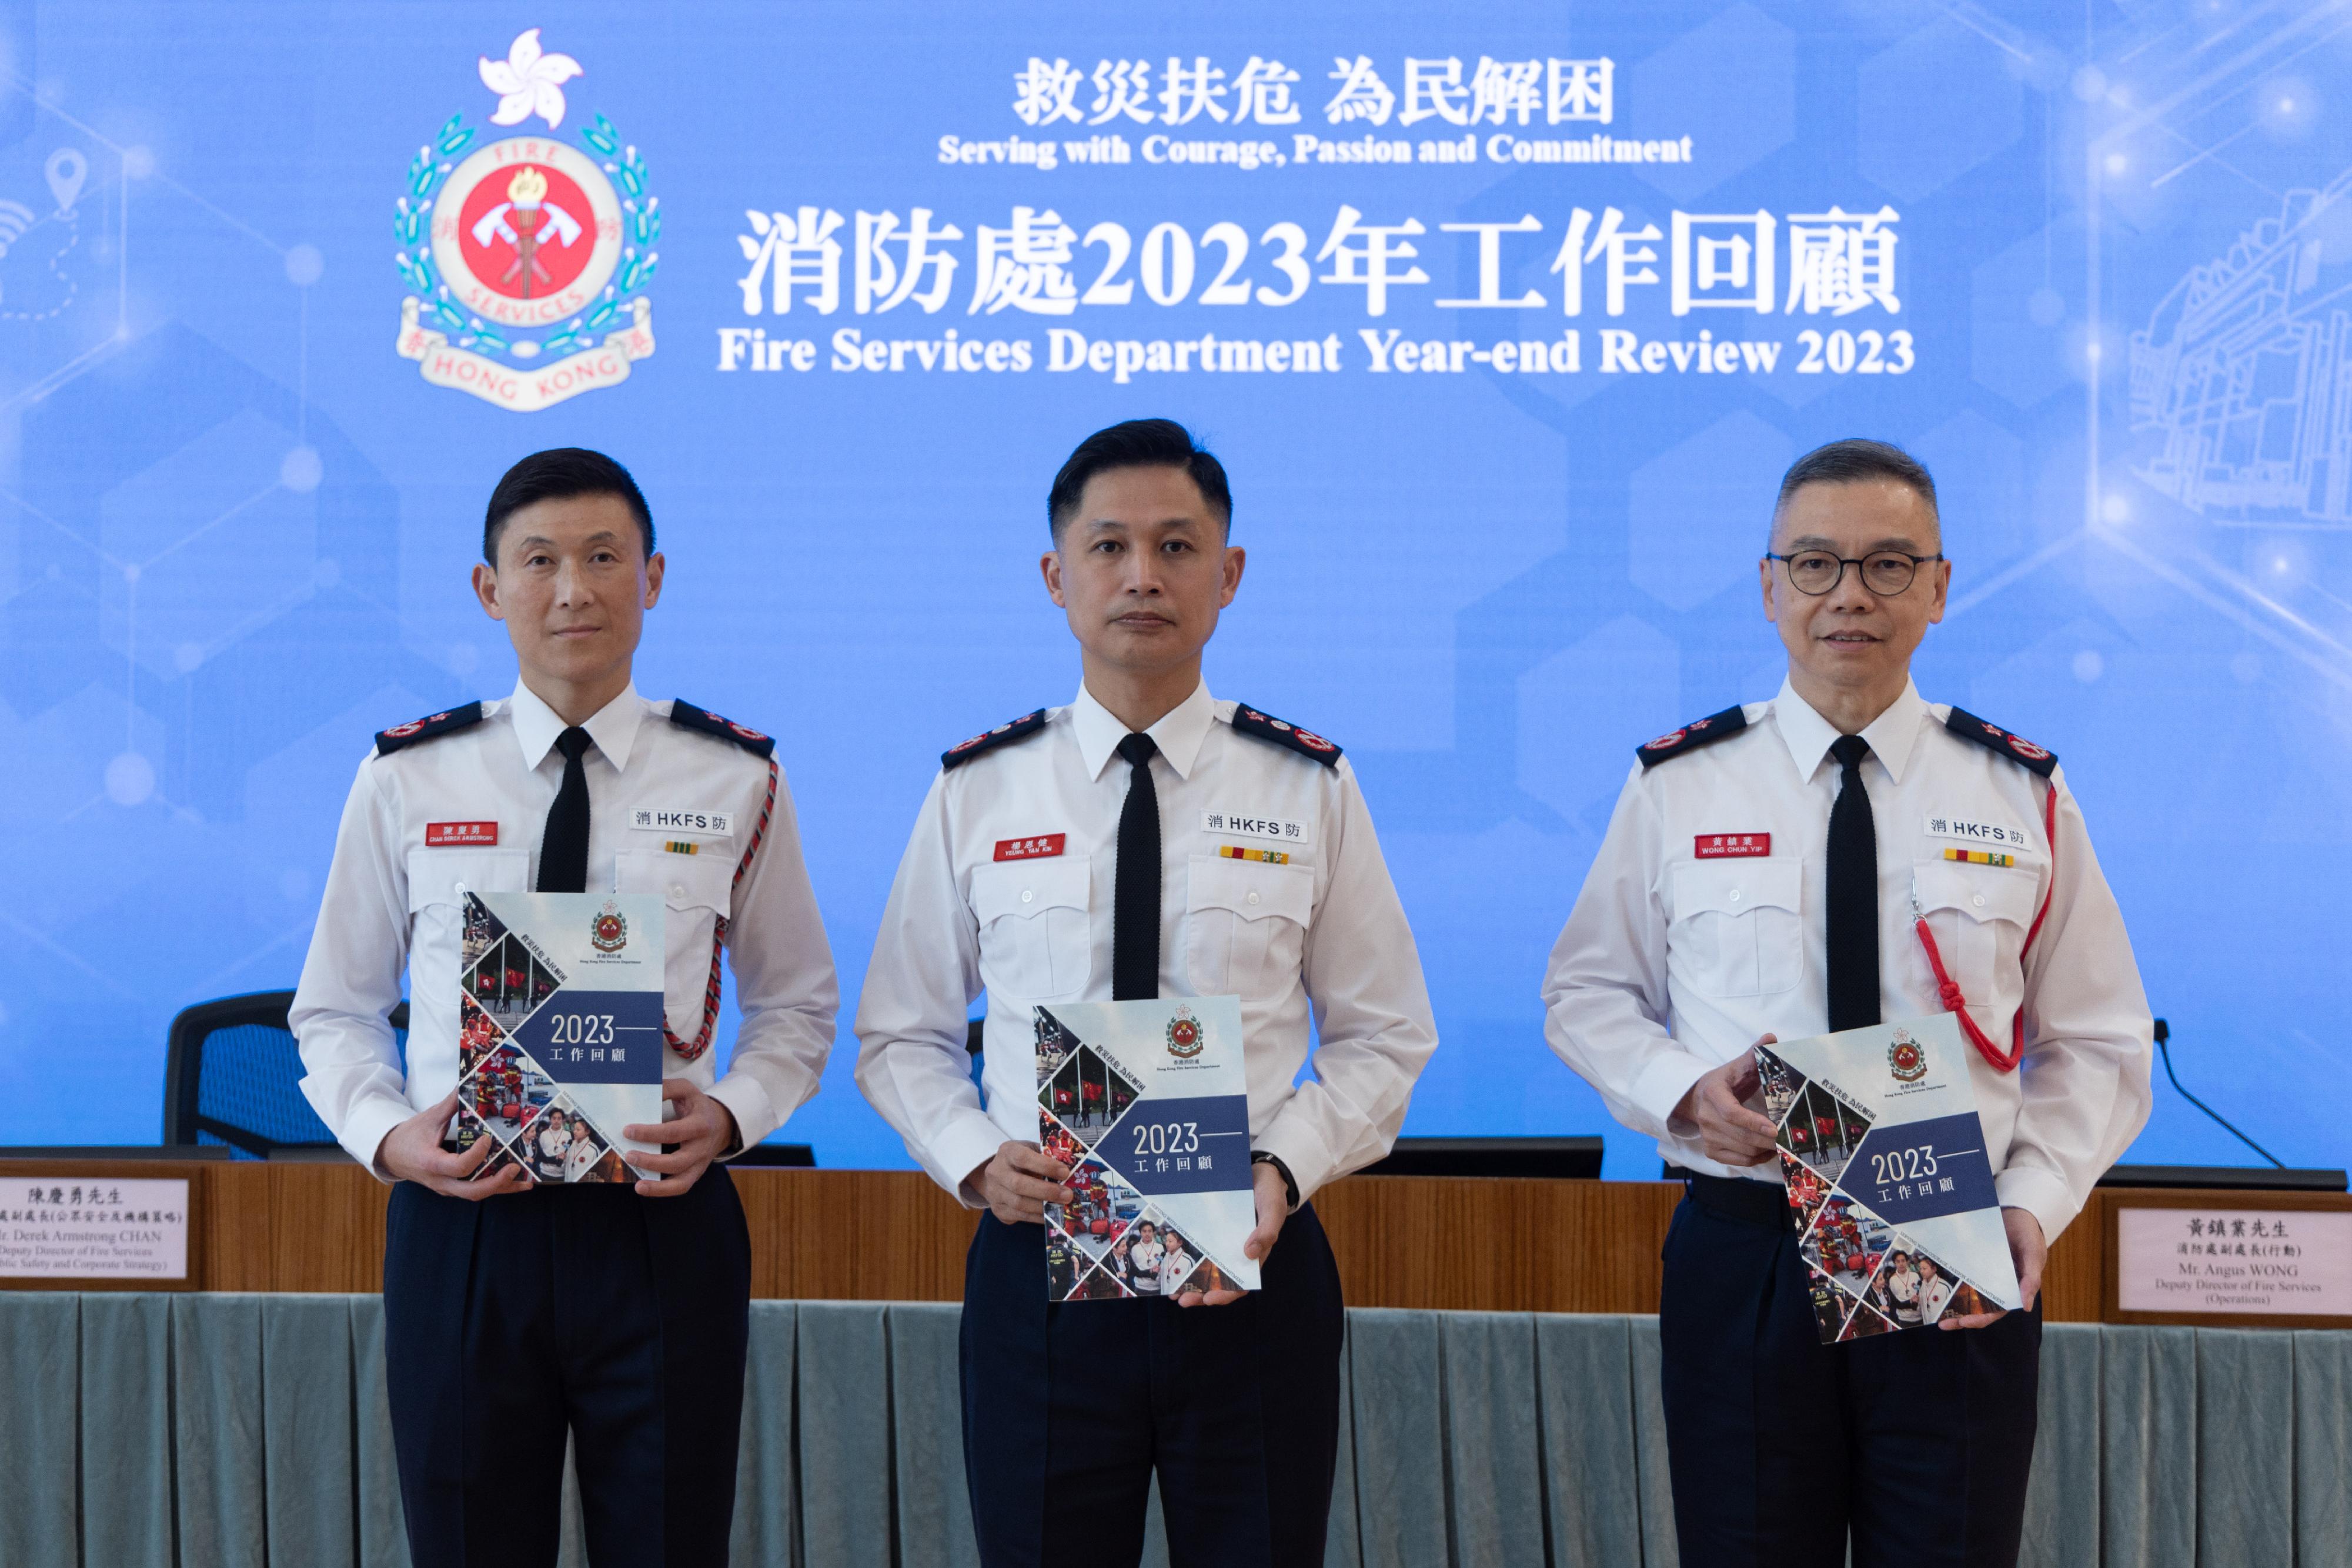 The Fire Services Department Year-end Review was held at the Fire and Ambulance Services Academy today (February 1). Photo shows the Director of Fire Services, Mr Andy Yeung (centre); the Deputy Director of Fire Services (Operations), Mr Angus Wong (right); and the Deputy Director of Fire Services (Public Safety and Corporate Strategy), Mr Derek Armstrong Chan (left).